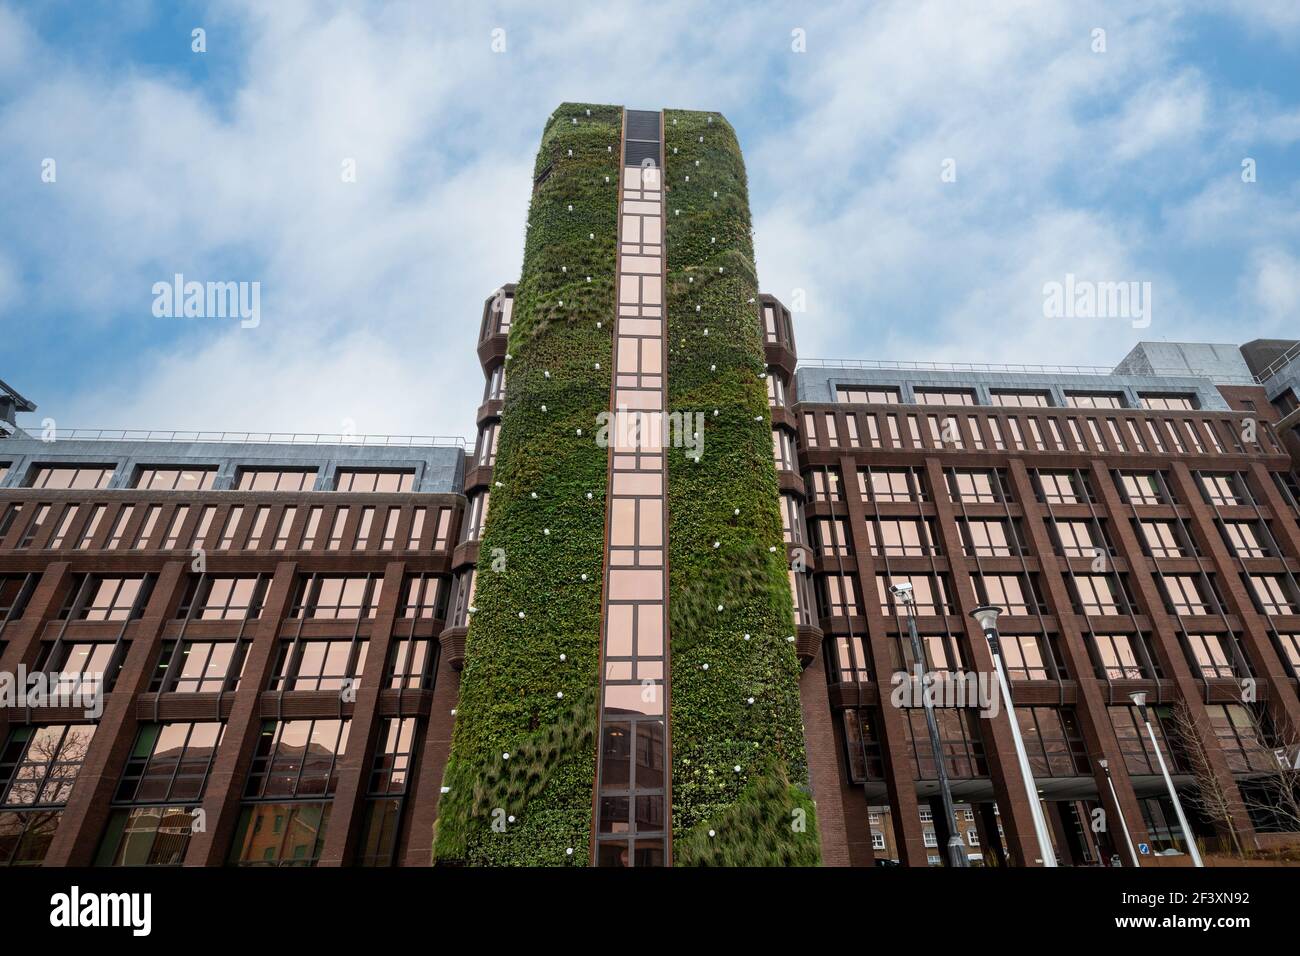 Living wall on Dukes Court, a 40 metre tall office building in Woking town, Surrey, England, UK, covered with green plants Stock Photo